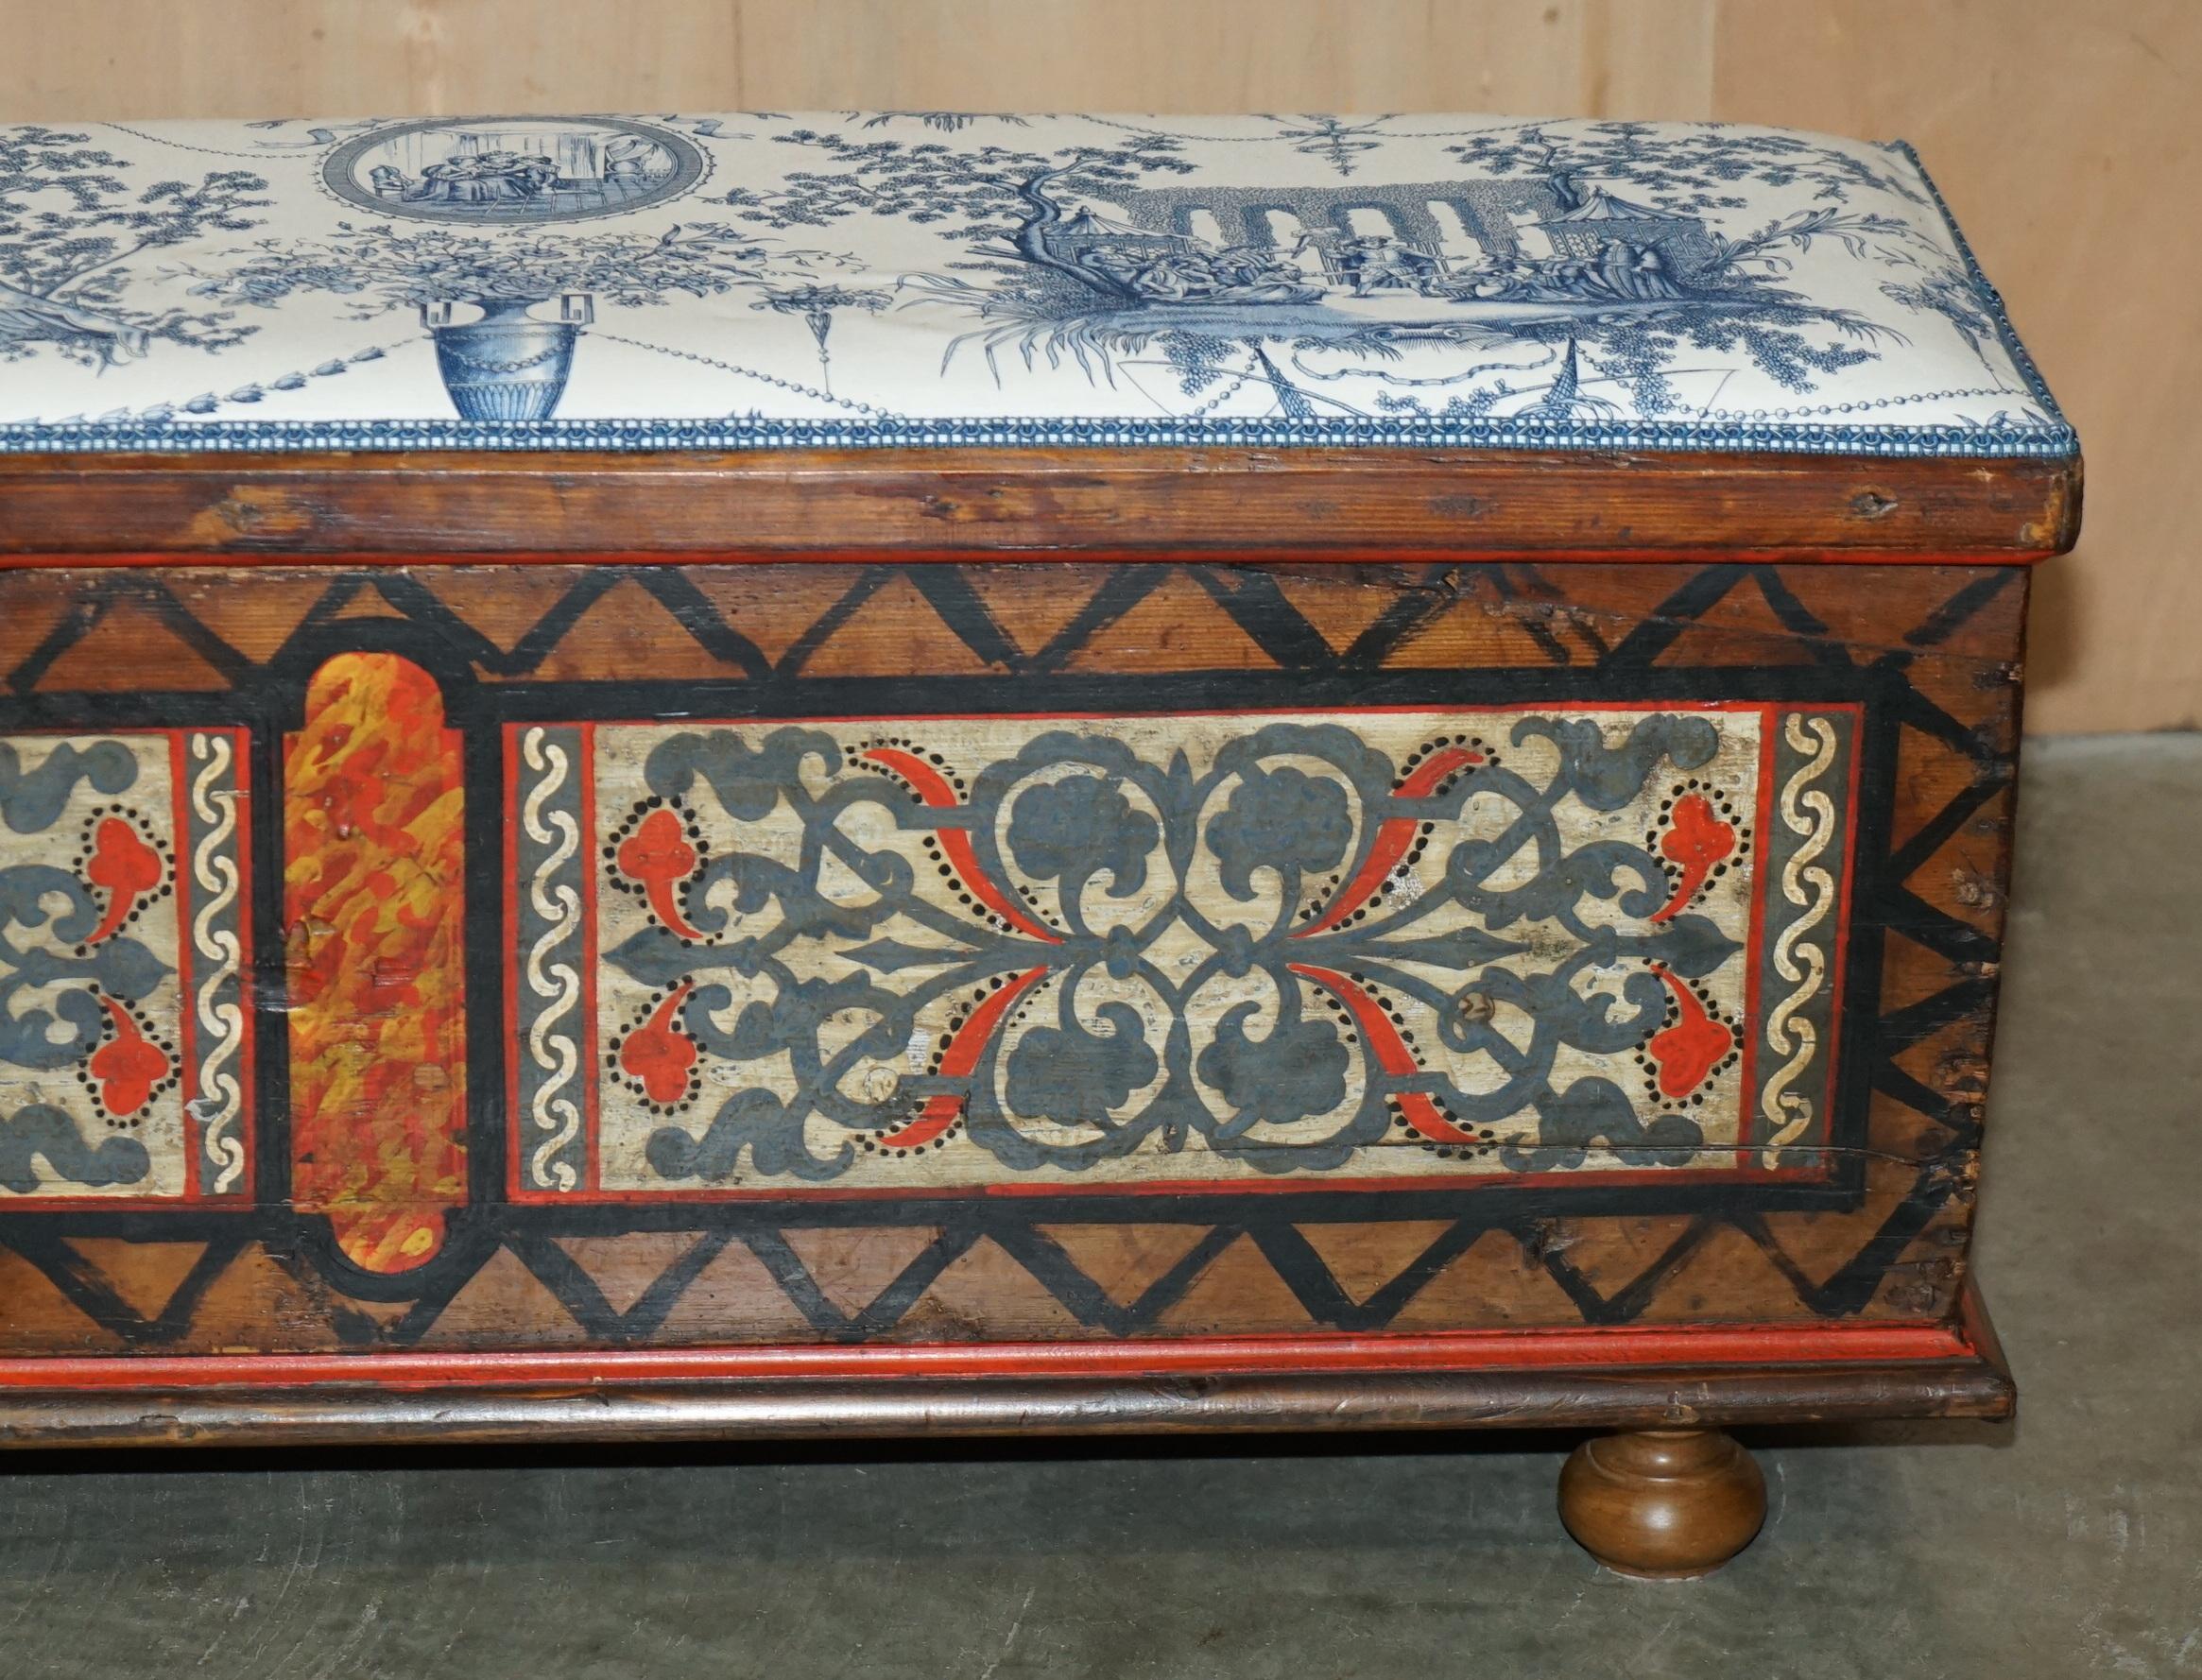 EXTRA lange CIRCA 1840 HAND PAiNTED COFFER TRUNK CHEST Used AS HALL BENCH SEATING (Mittleres 19. Jahrhundert) im Angebot